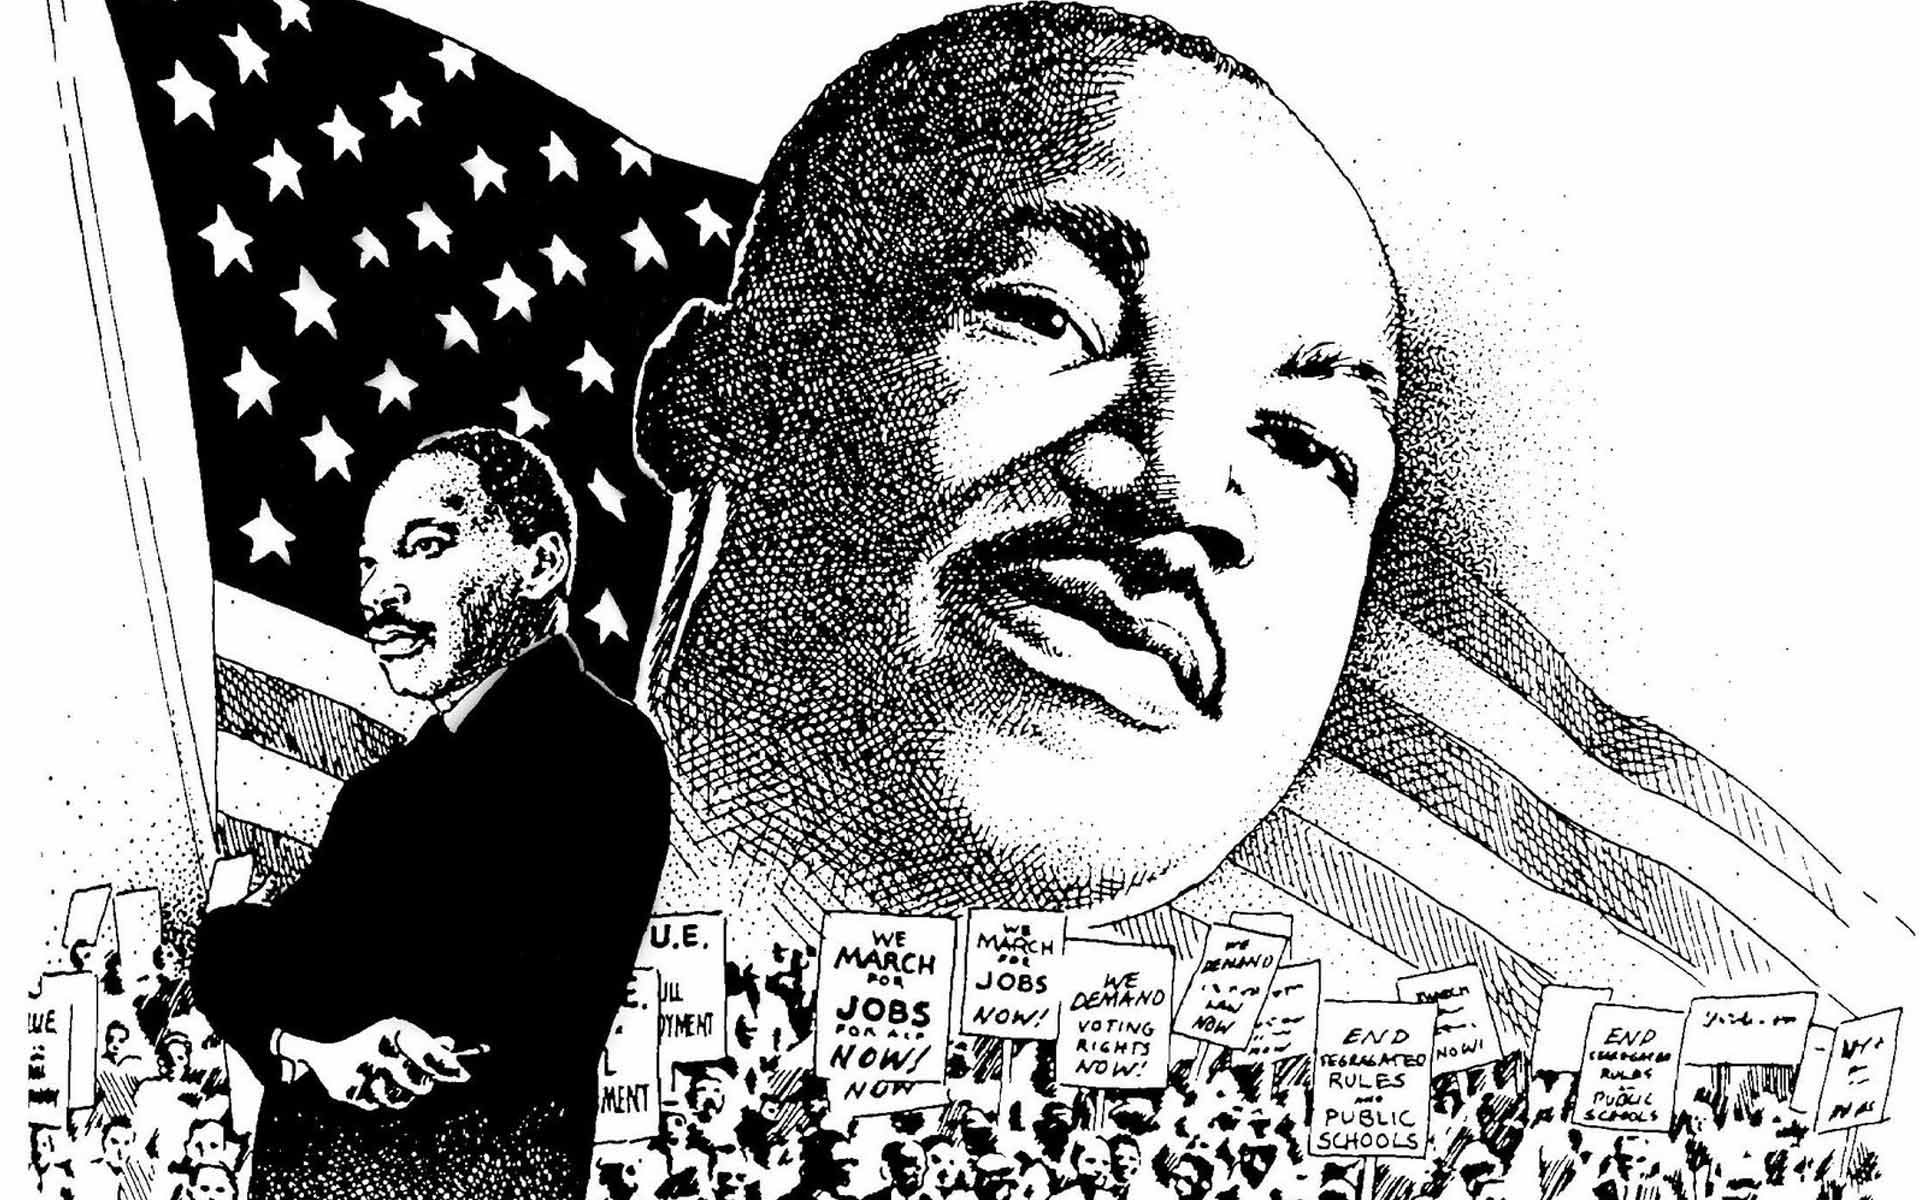 MARTIN LUTHER KING JR negro african american civil rights political poster (36) wallpaperx1200